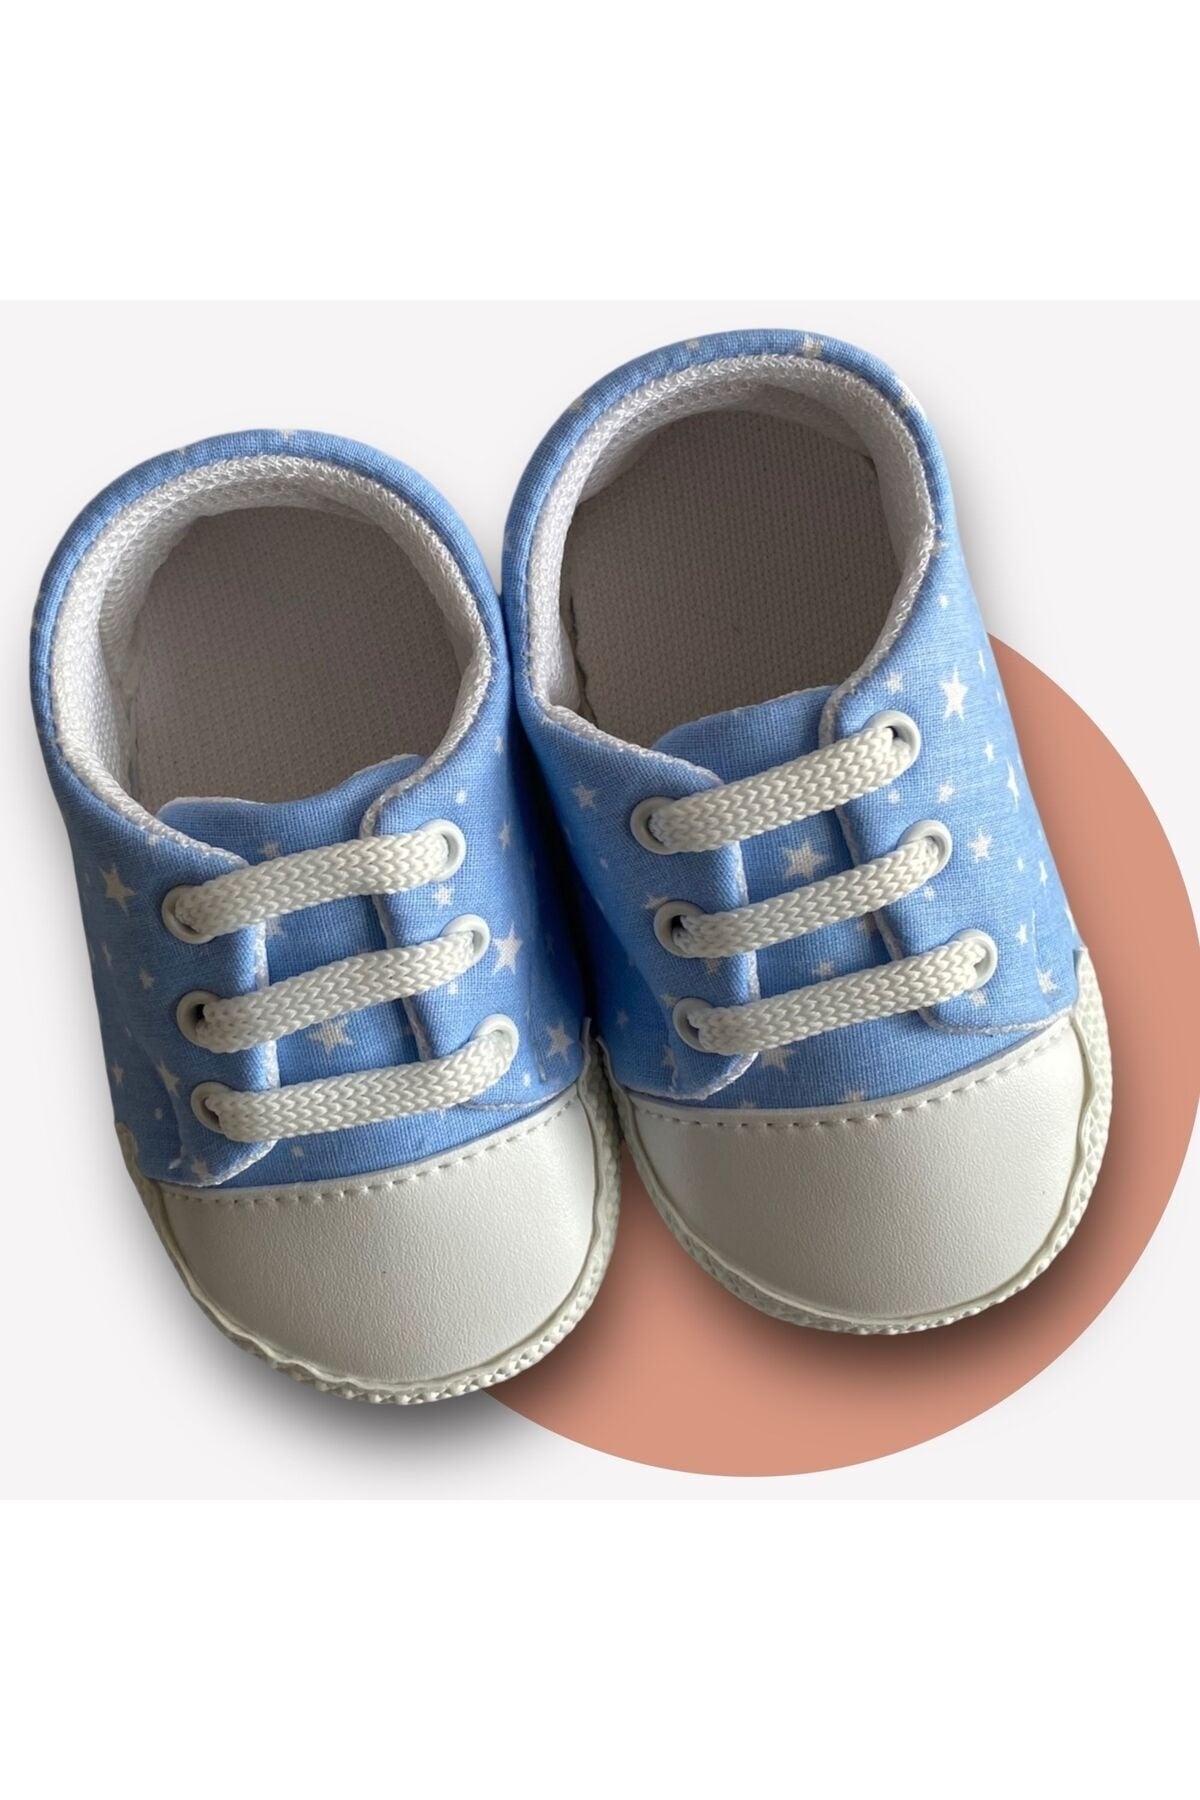 Baby First Step Shoes